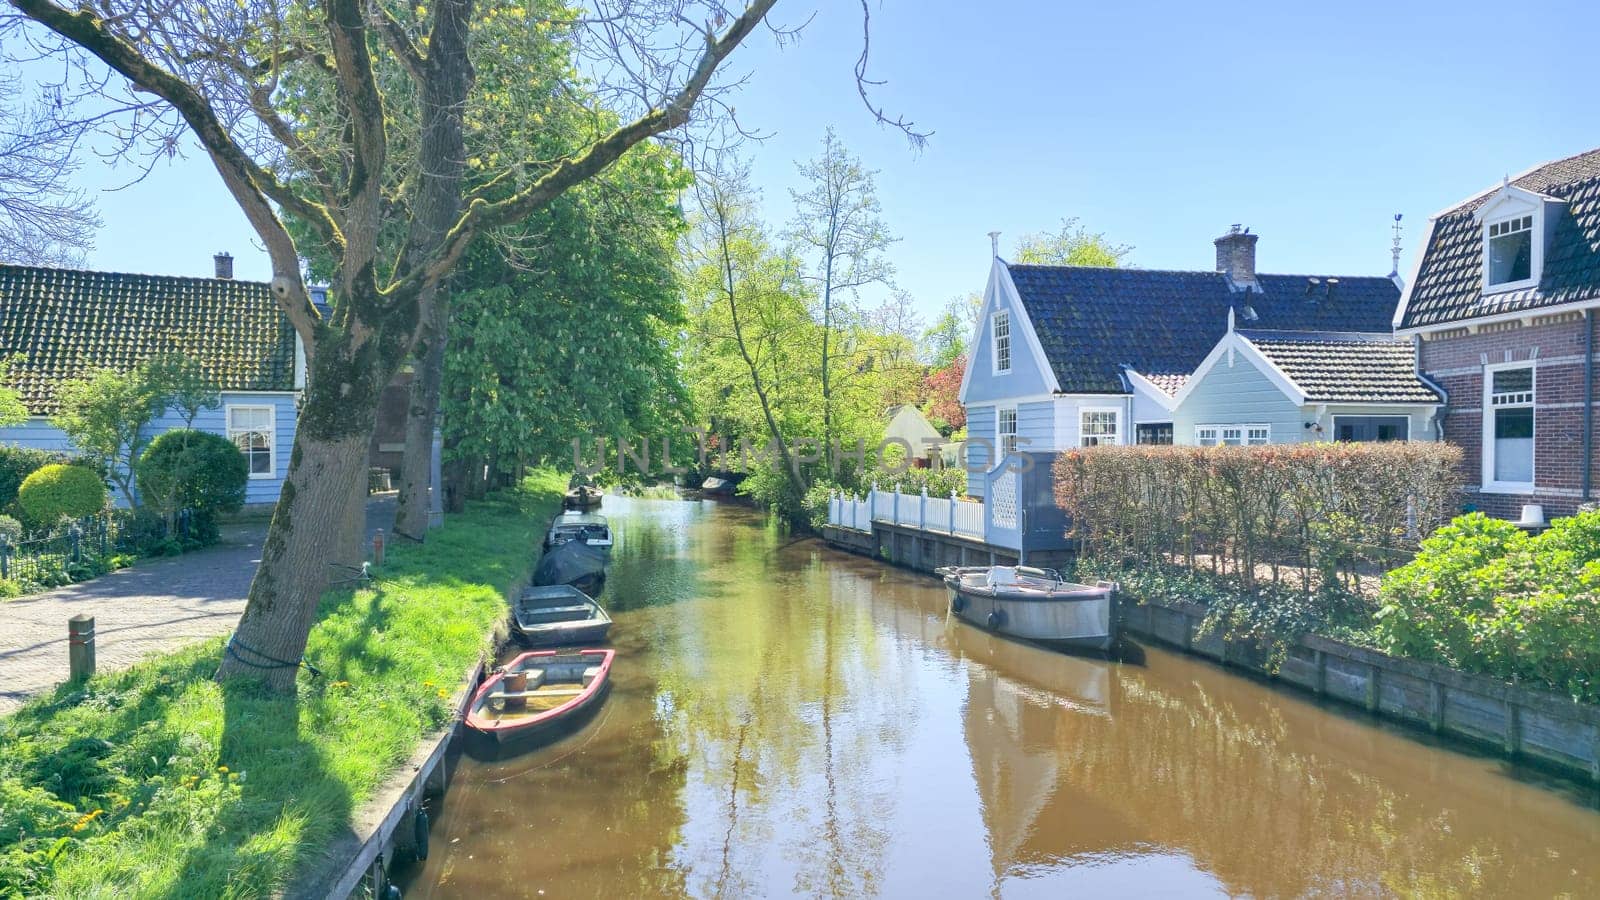 Boats leisurely glide through the calm canal lined with charming houses on a tranquil day. Broek in Waterland Netherlands